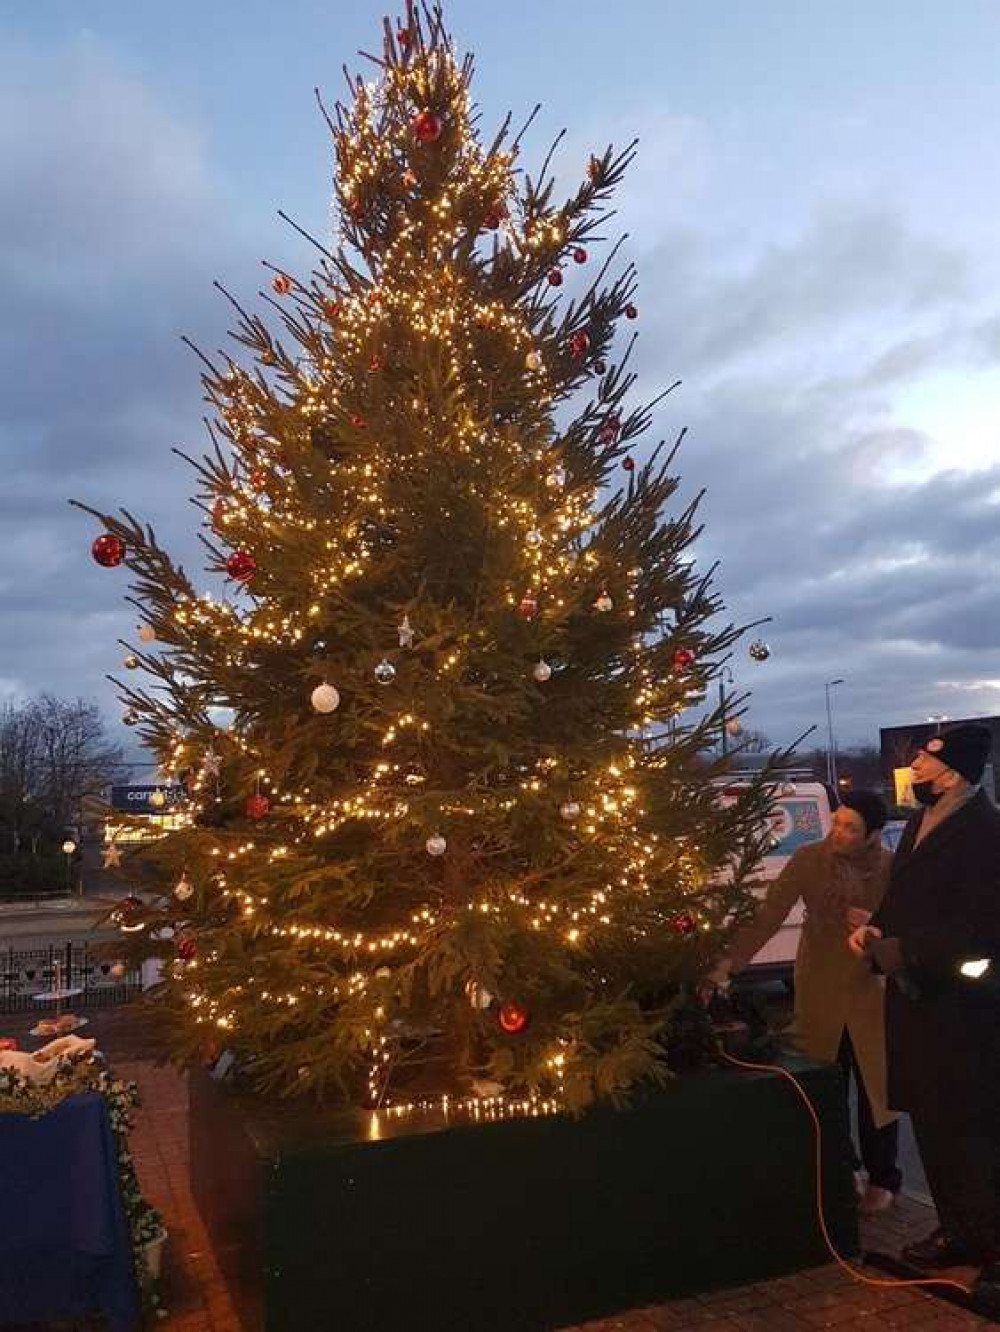 The Christmas tree lights were switched on by Brentford Councillor Mel Collins, right. (Image: Jim Storrar)